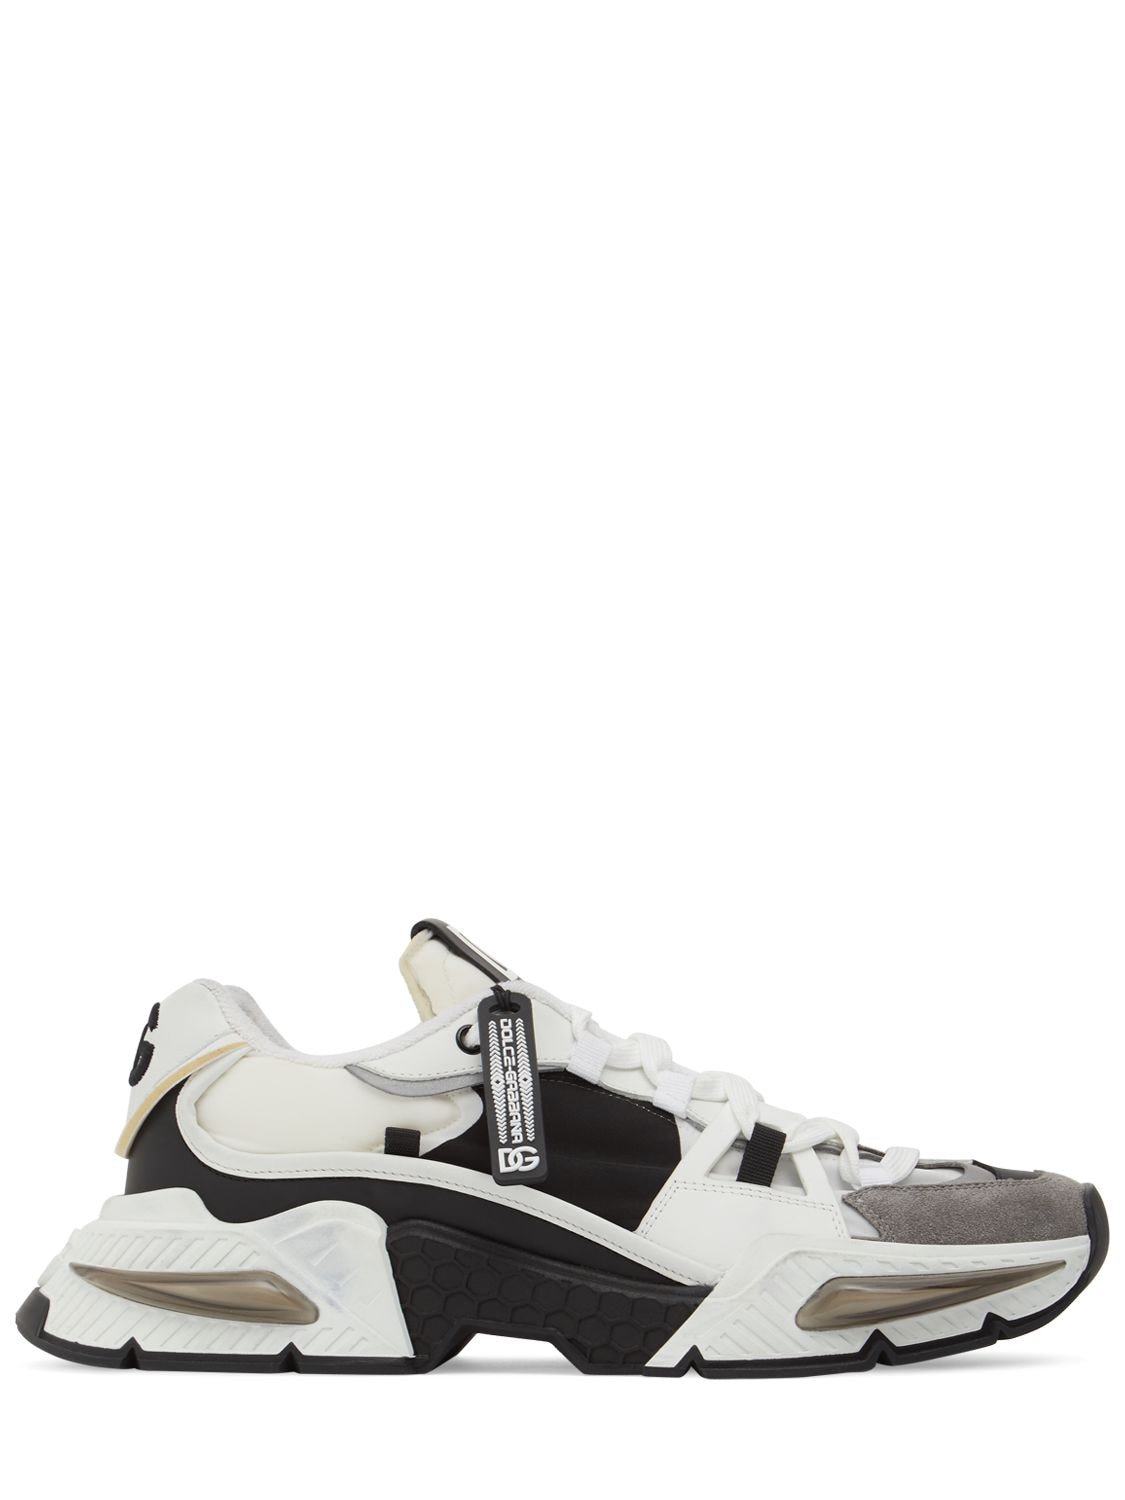 Dolce & Gabbana Air Master Tech Low Top Trainers In White,grey,black